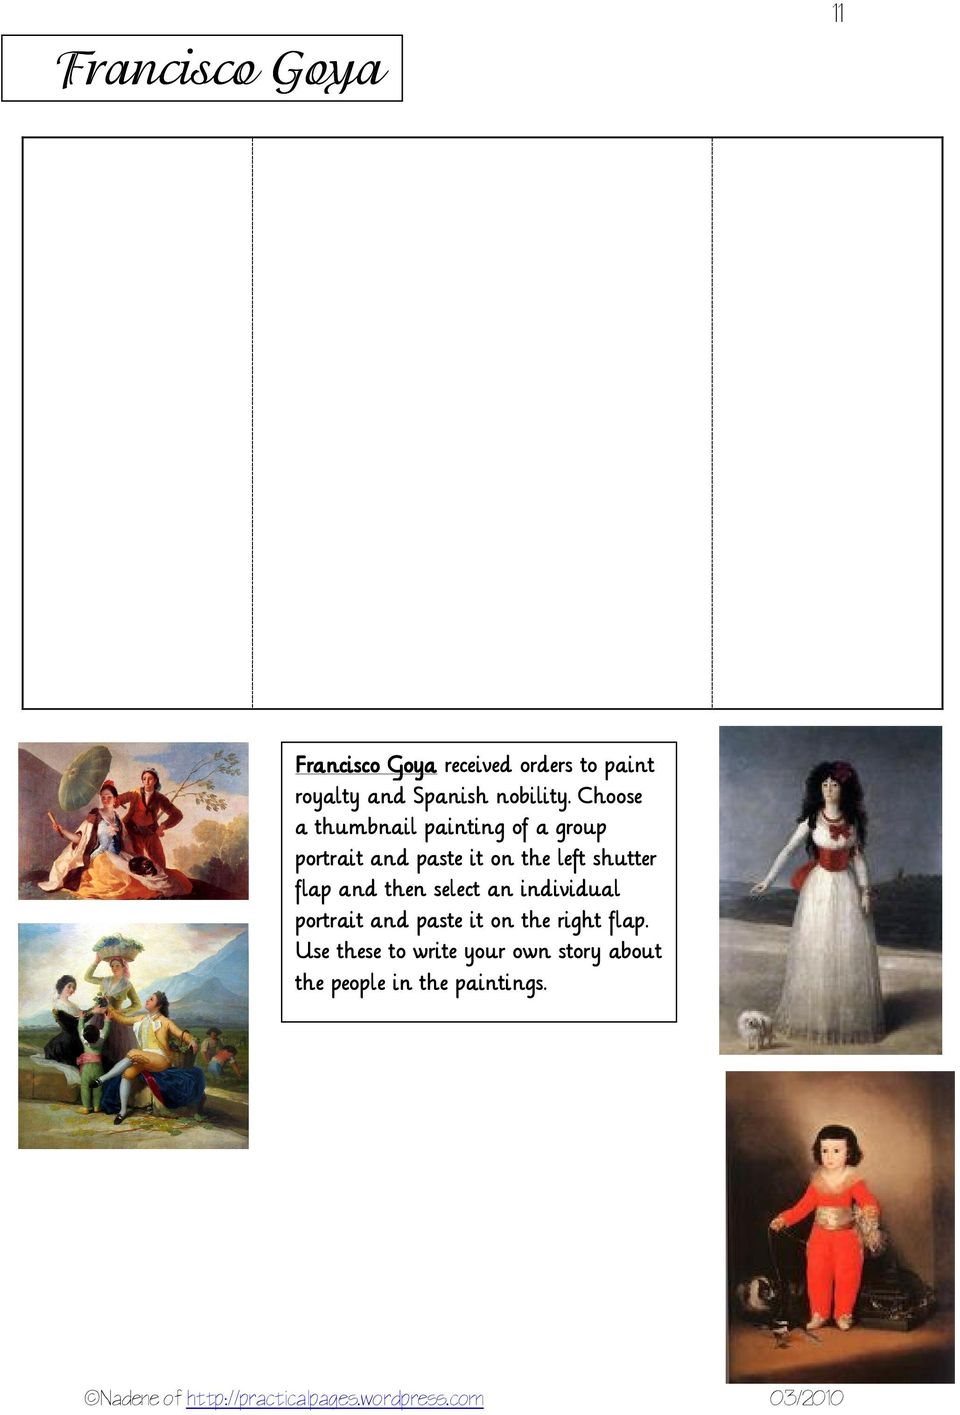 Choose a thumbnail painting of a group portrait and paste it on the left